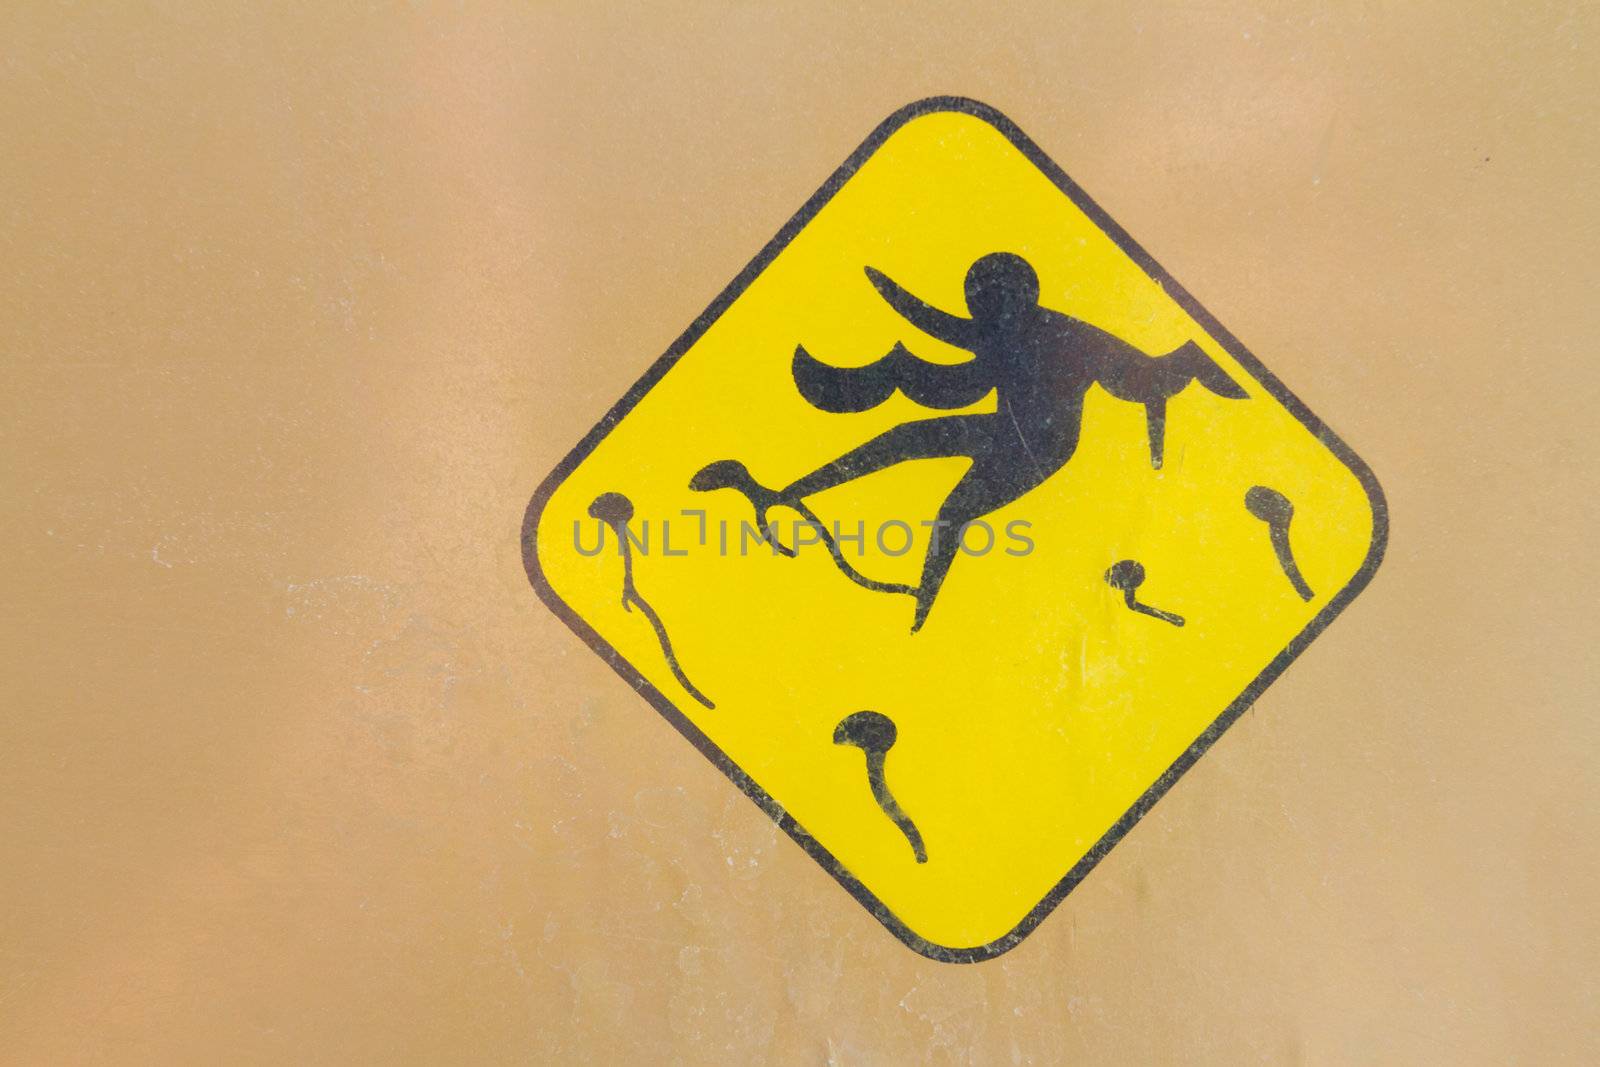 A yellow and black caution sign shows jelly fish stinging a person in the water and waves.